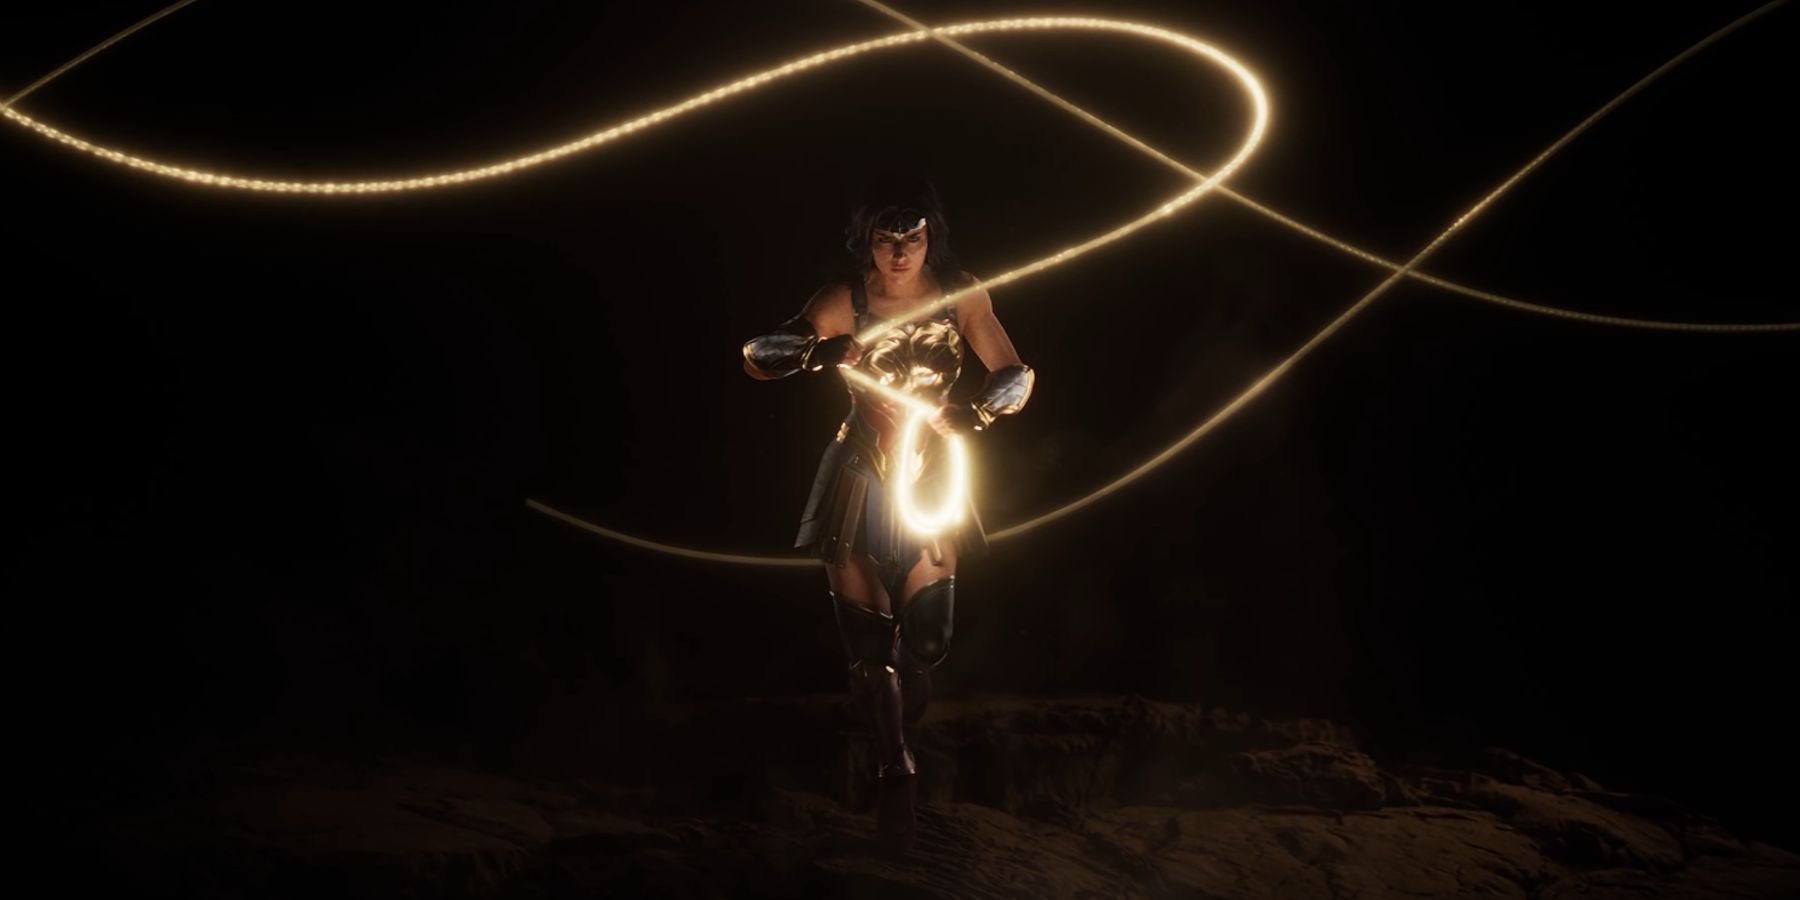 wonder woman game monolith productions wb justice league characters